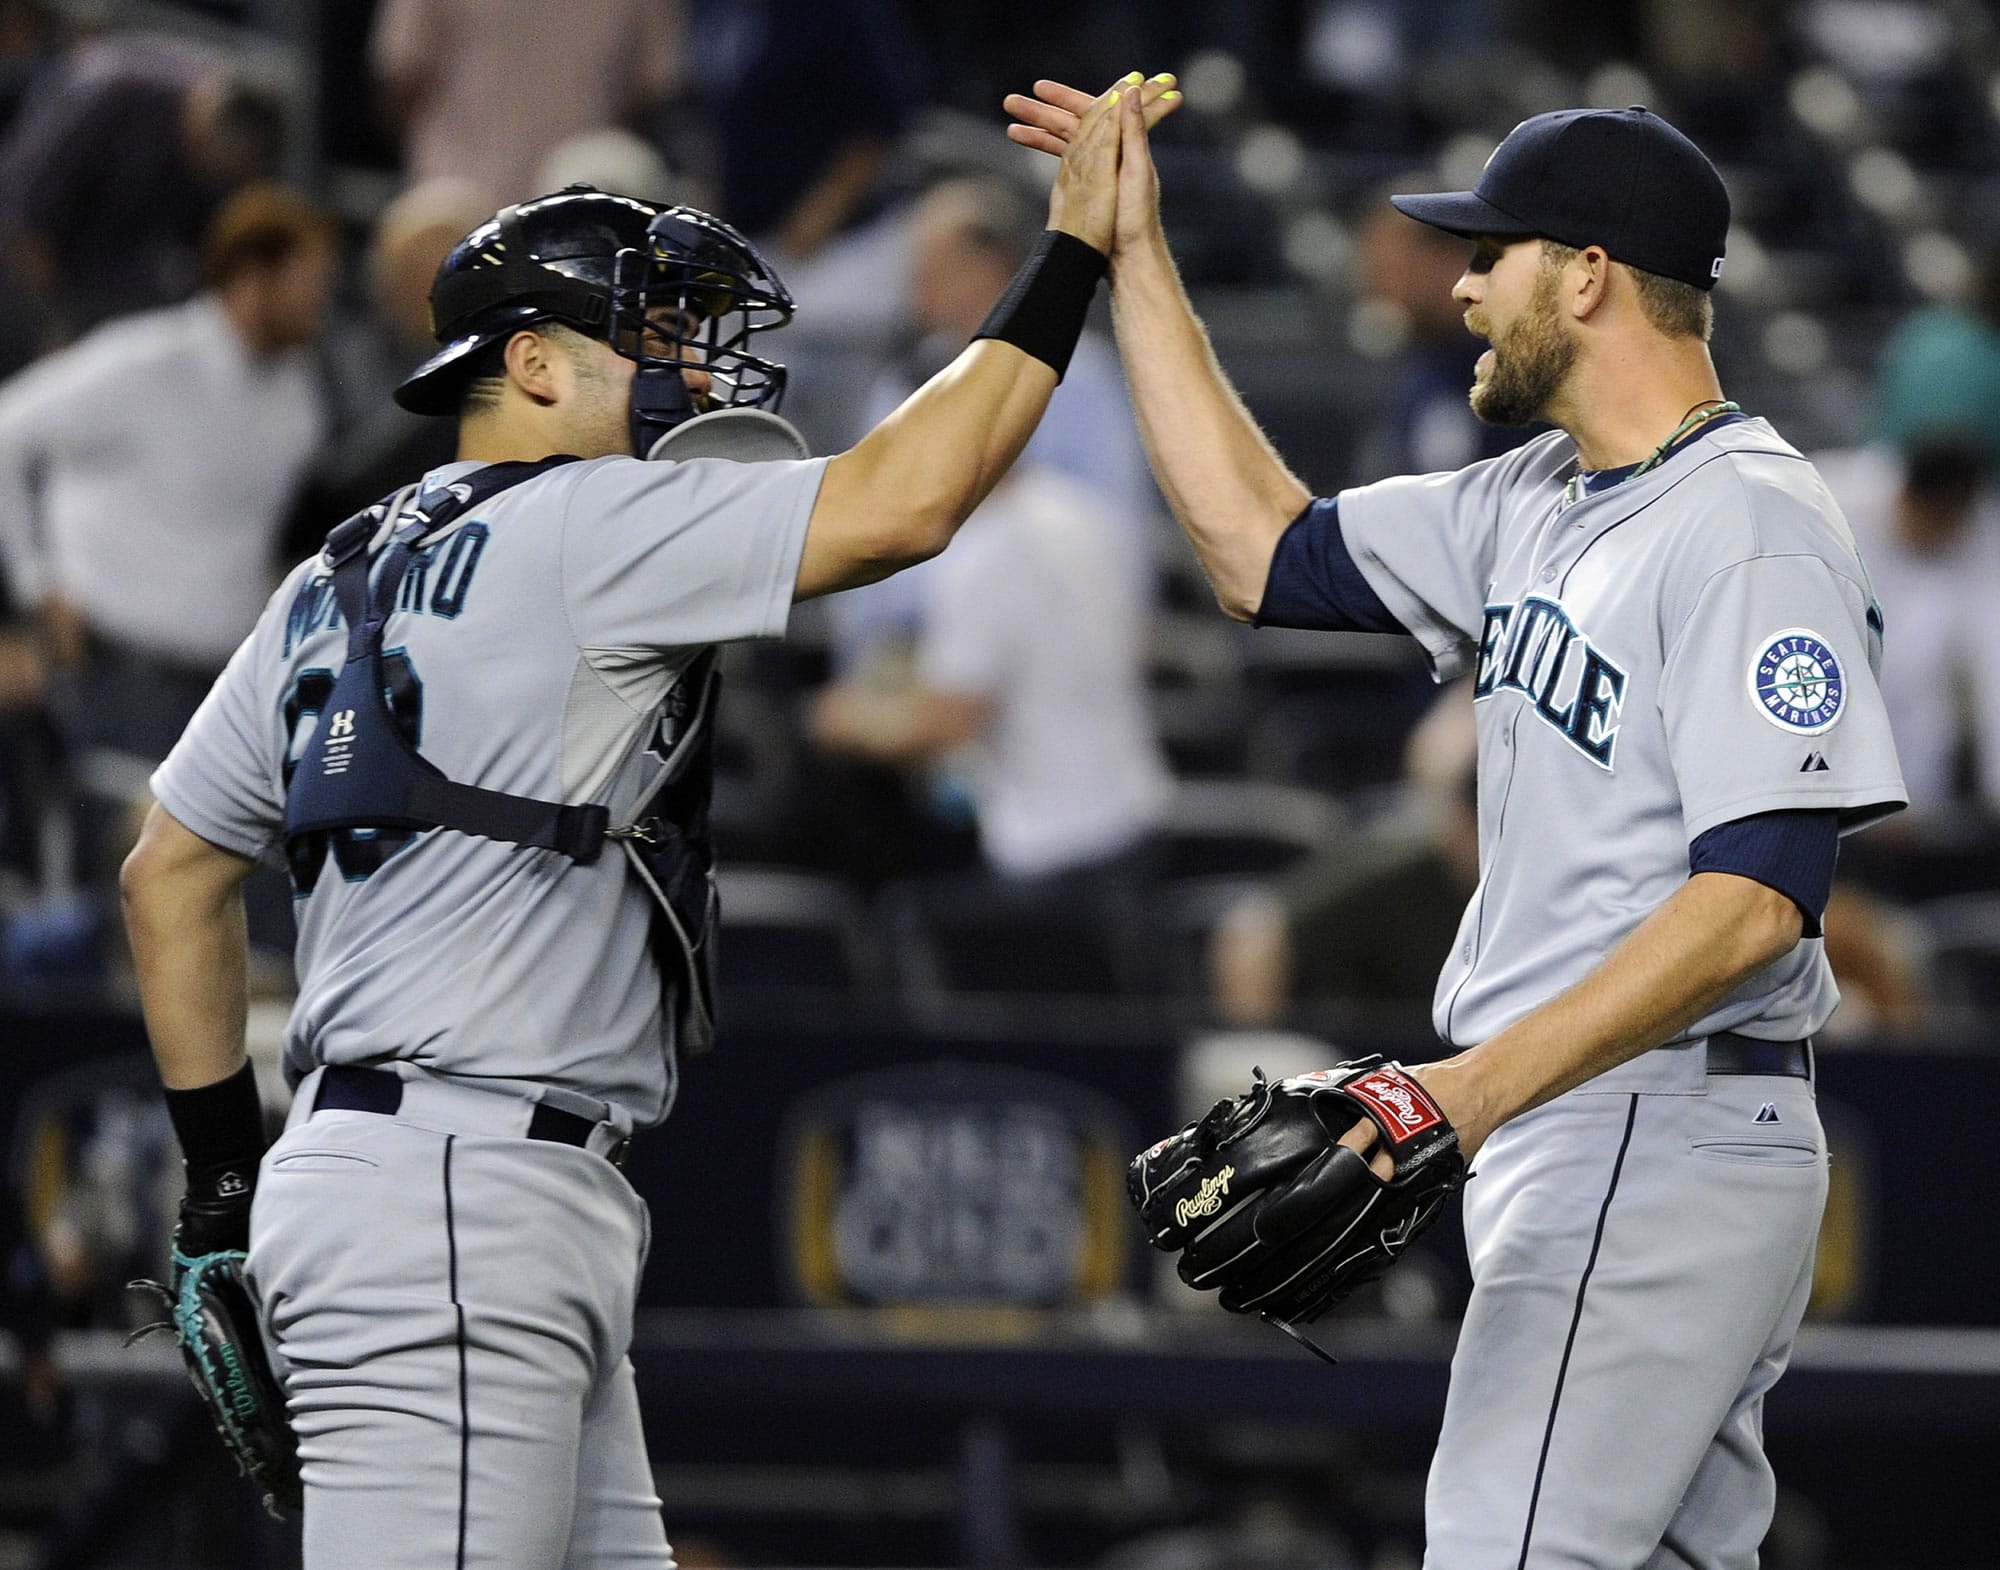 Seattle Mariners closer Tom Wilhelmsen celebrates with catcher Jesus Montero after defeating the New York Yankees, 3-2 on Thursday.